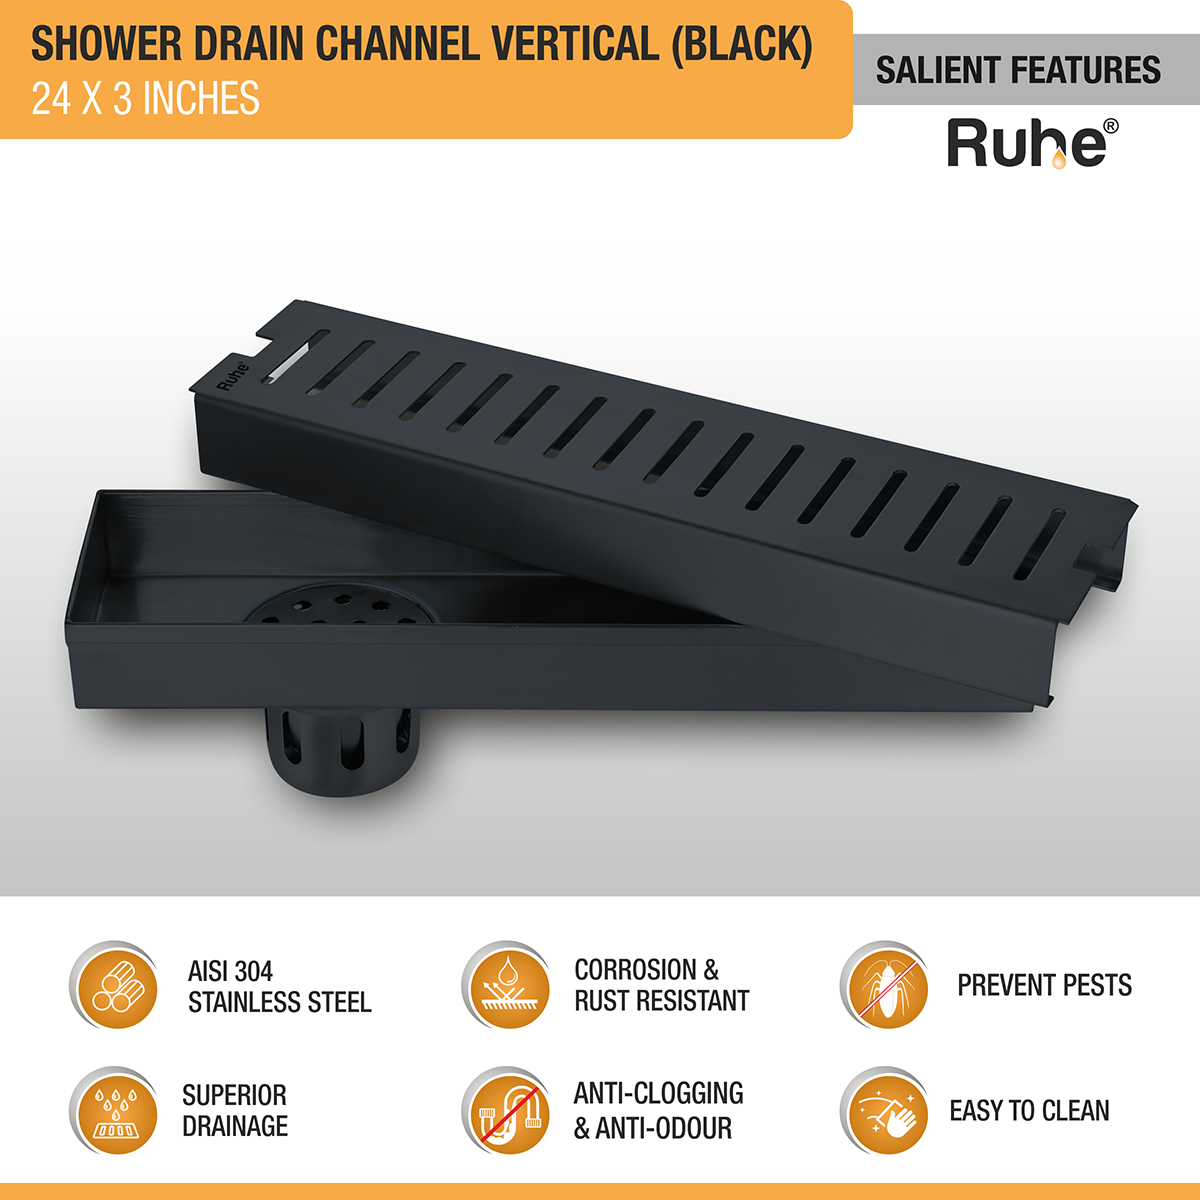 Vertical Shower Drain Channel (24 x 3 Inches) Black PVD Coated features and benefits